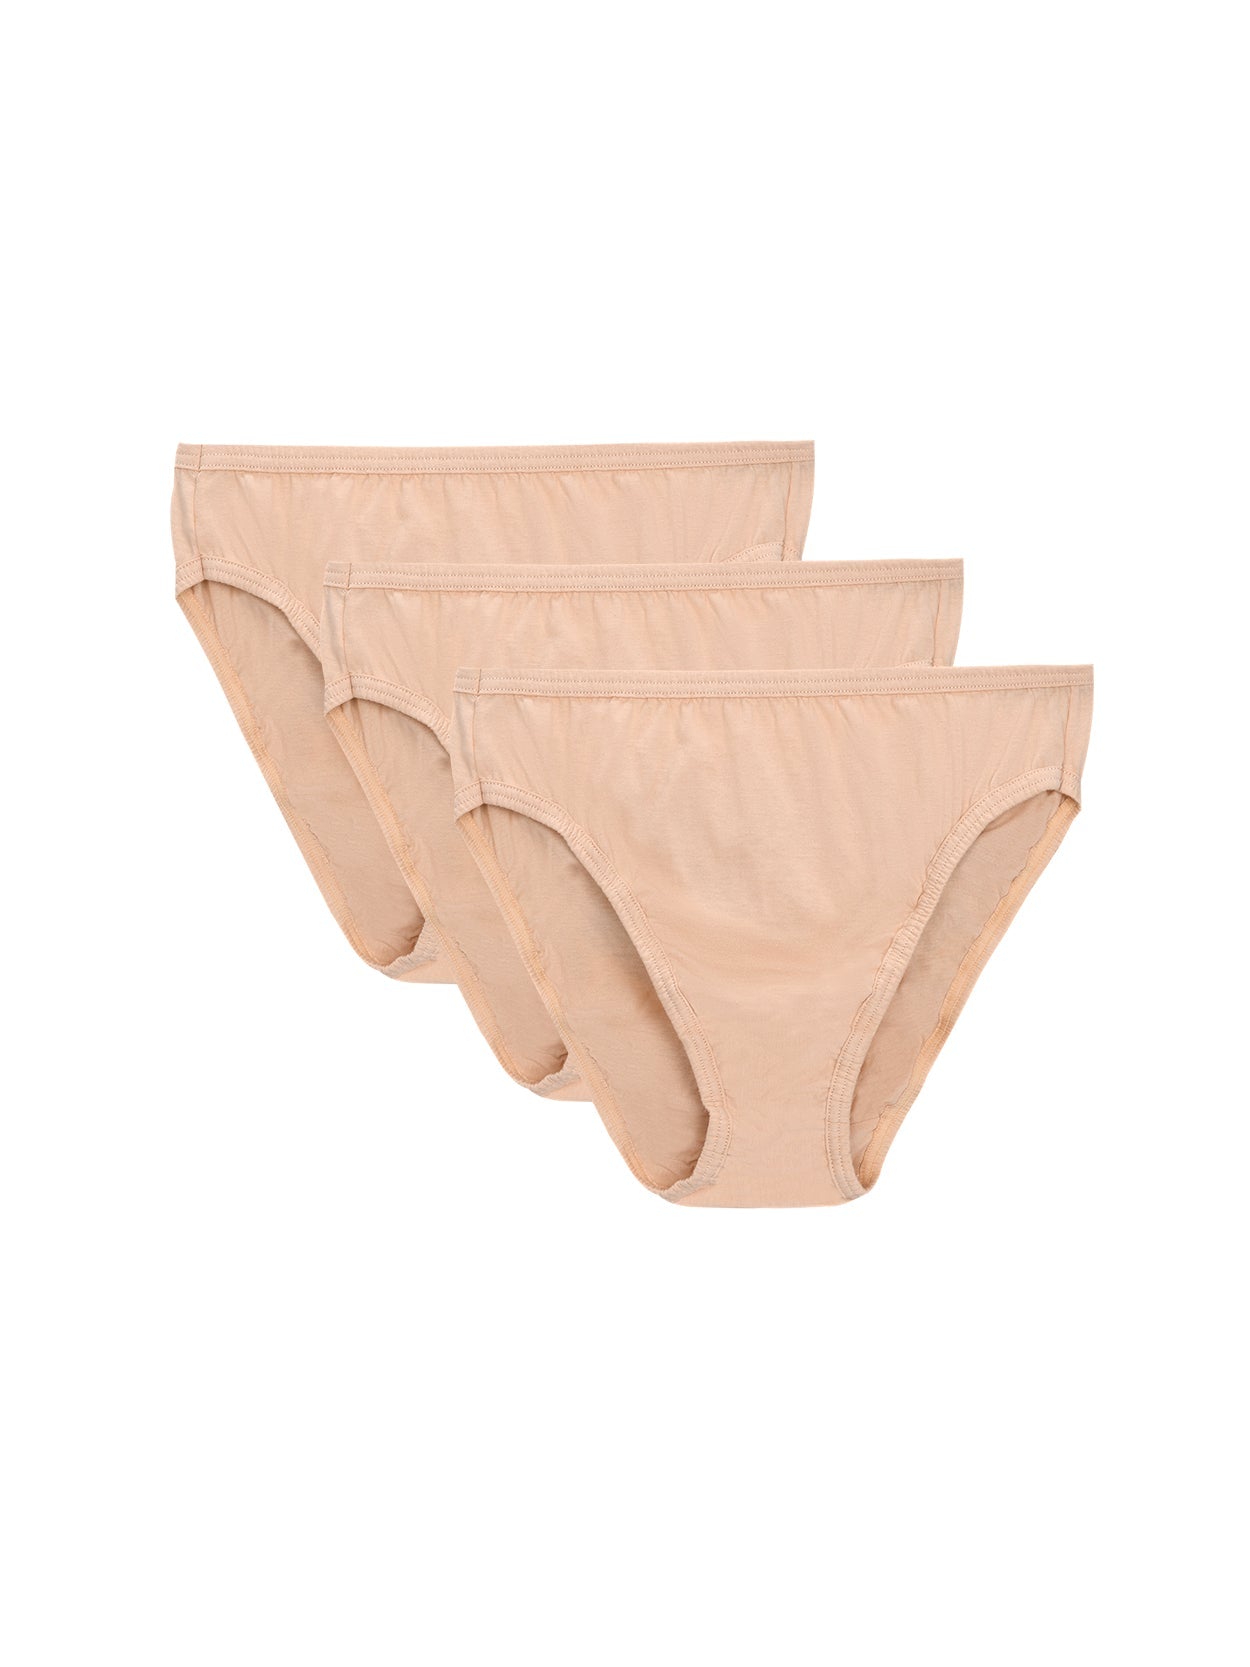 CURRAD Cotton Panty Set Of 3 For Women High Waist Briefs In Plus